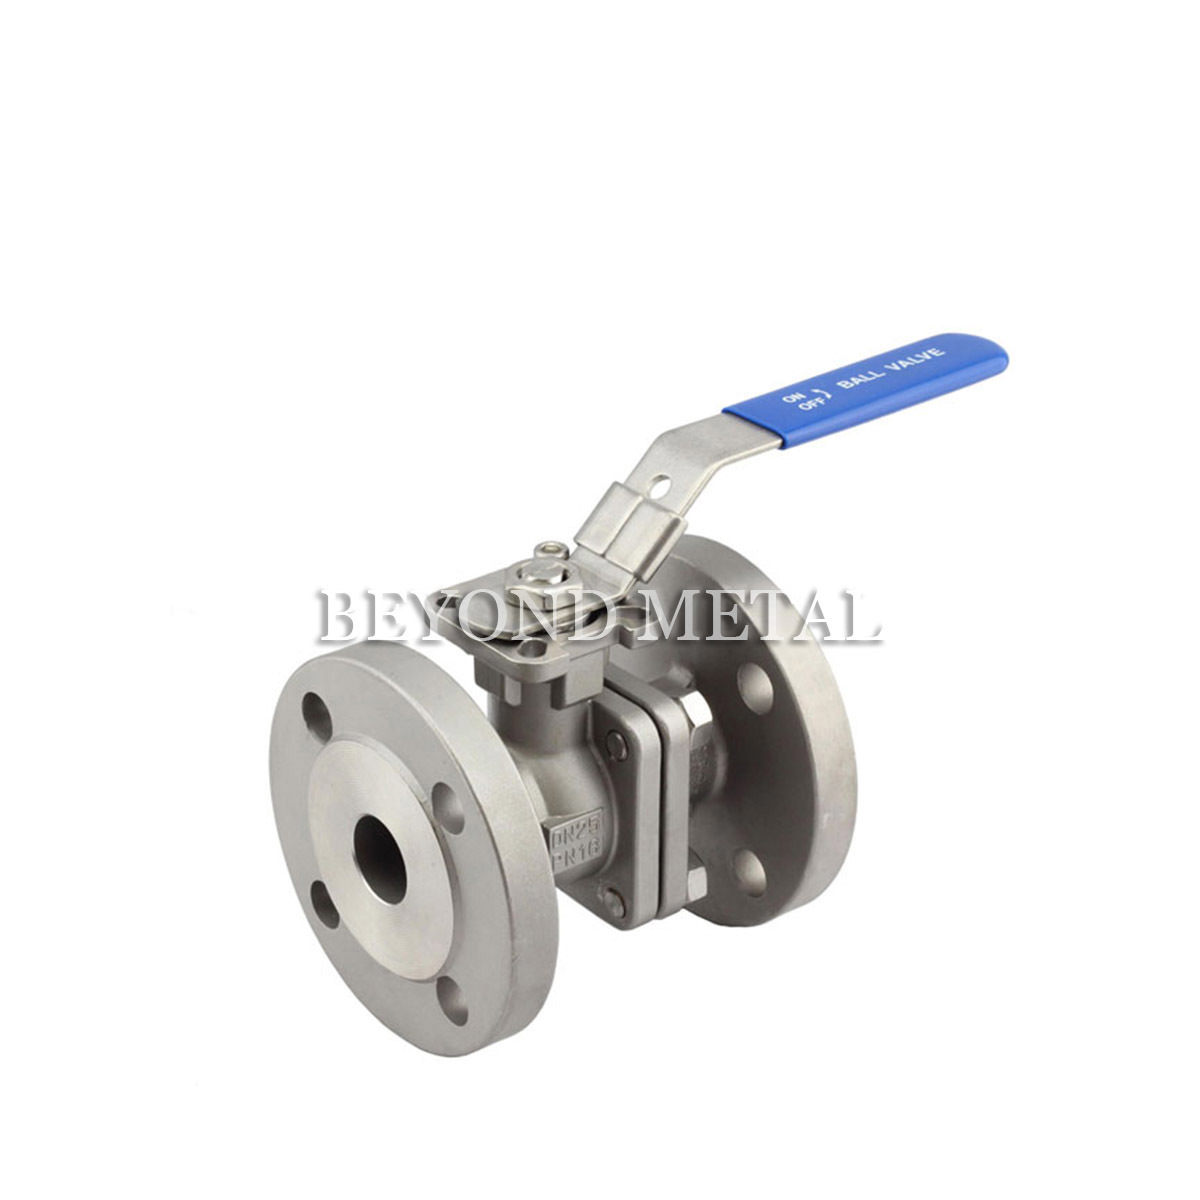 2PC FLANGED BALL VALVE WITH DIRECT MOUNTING PAD(ANSI)